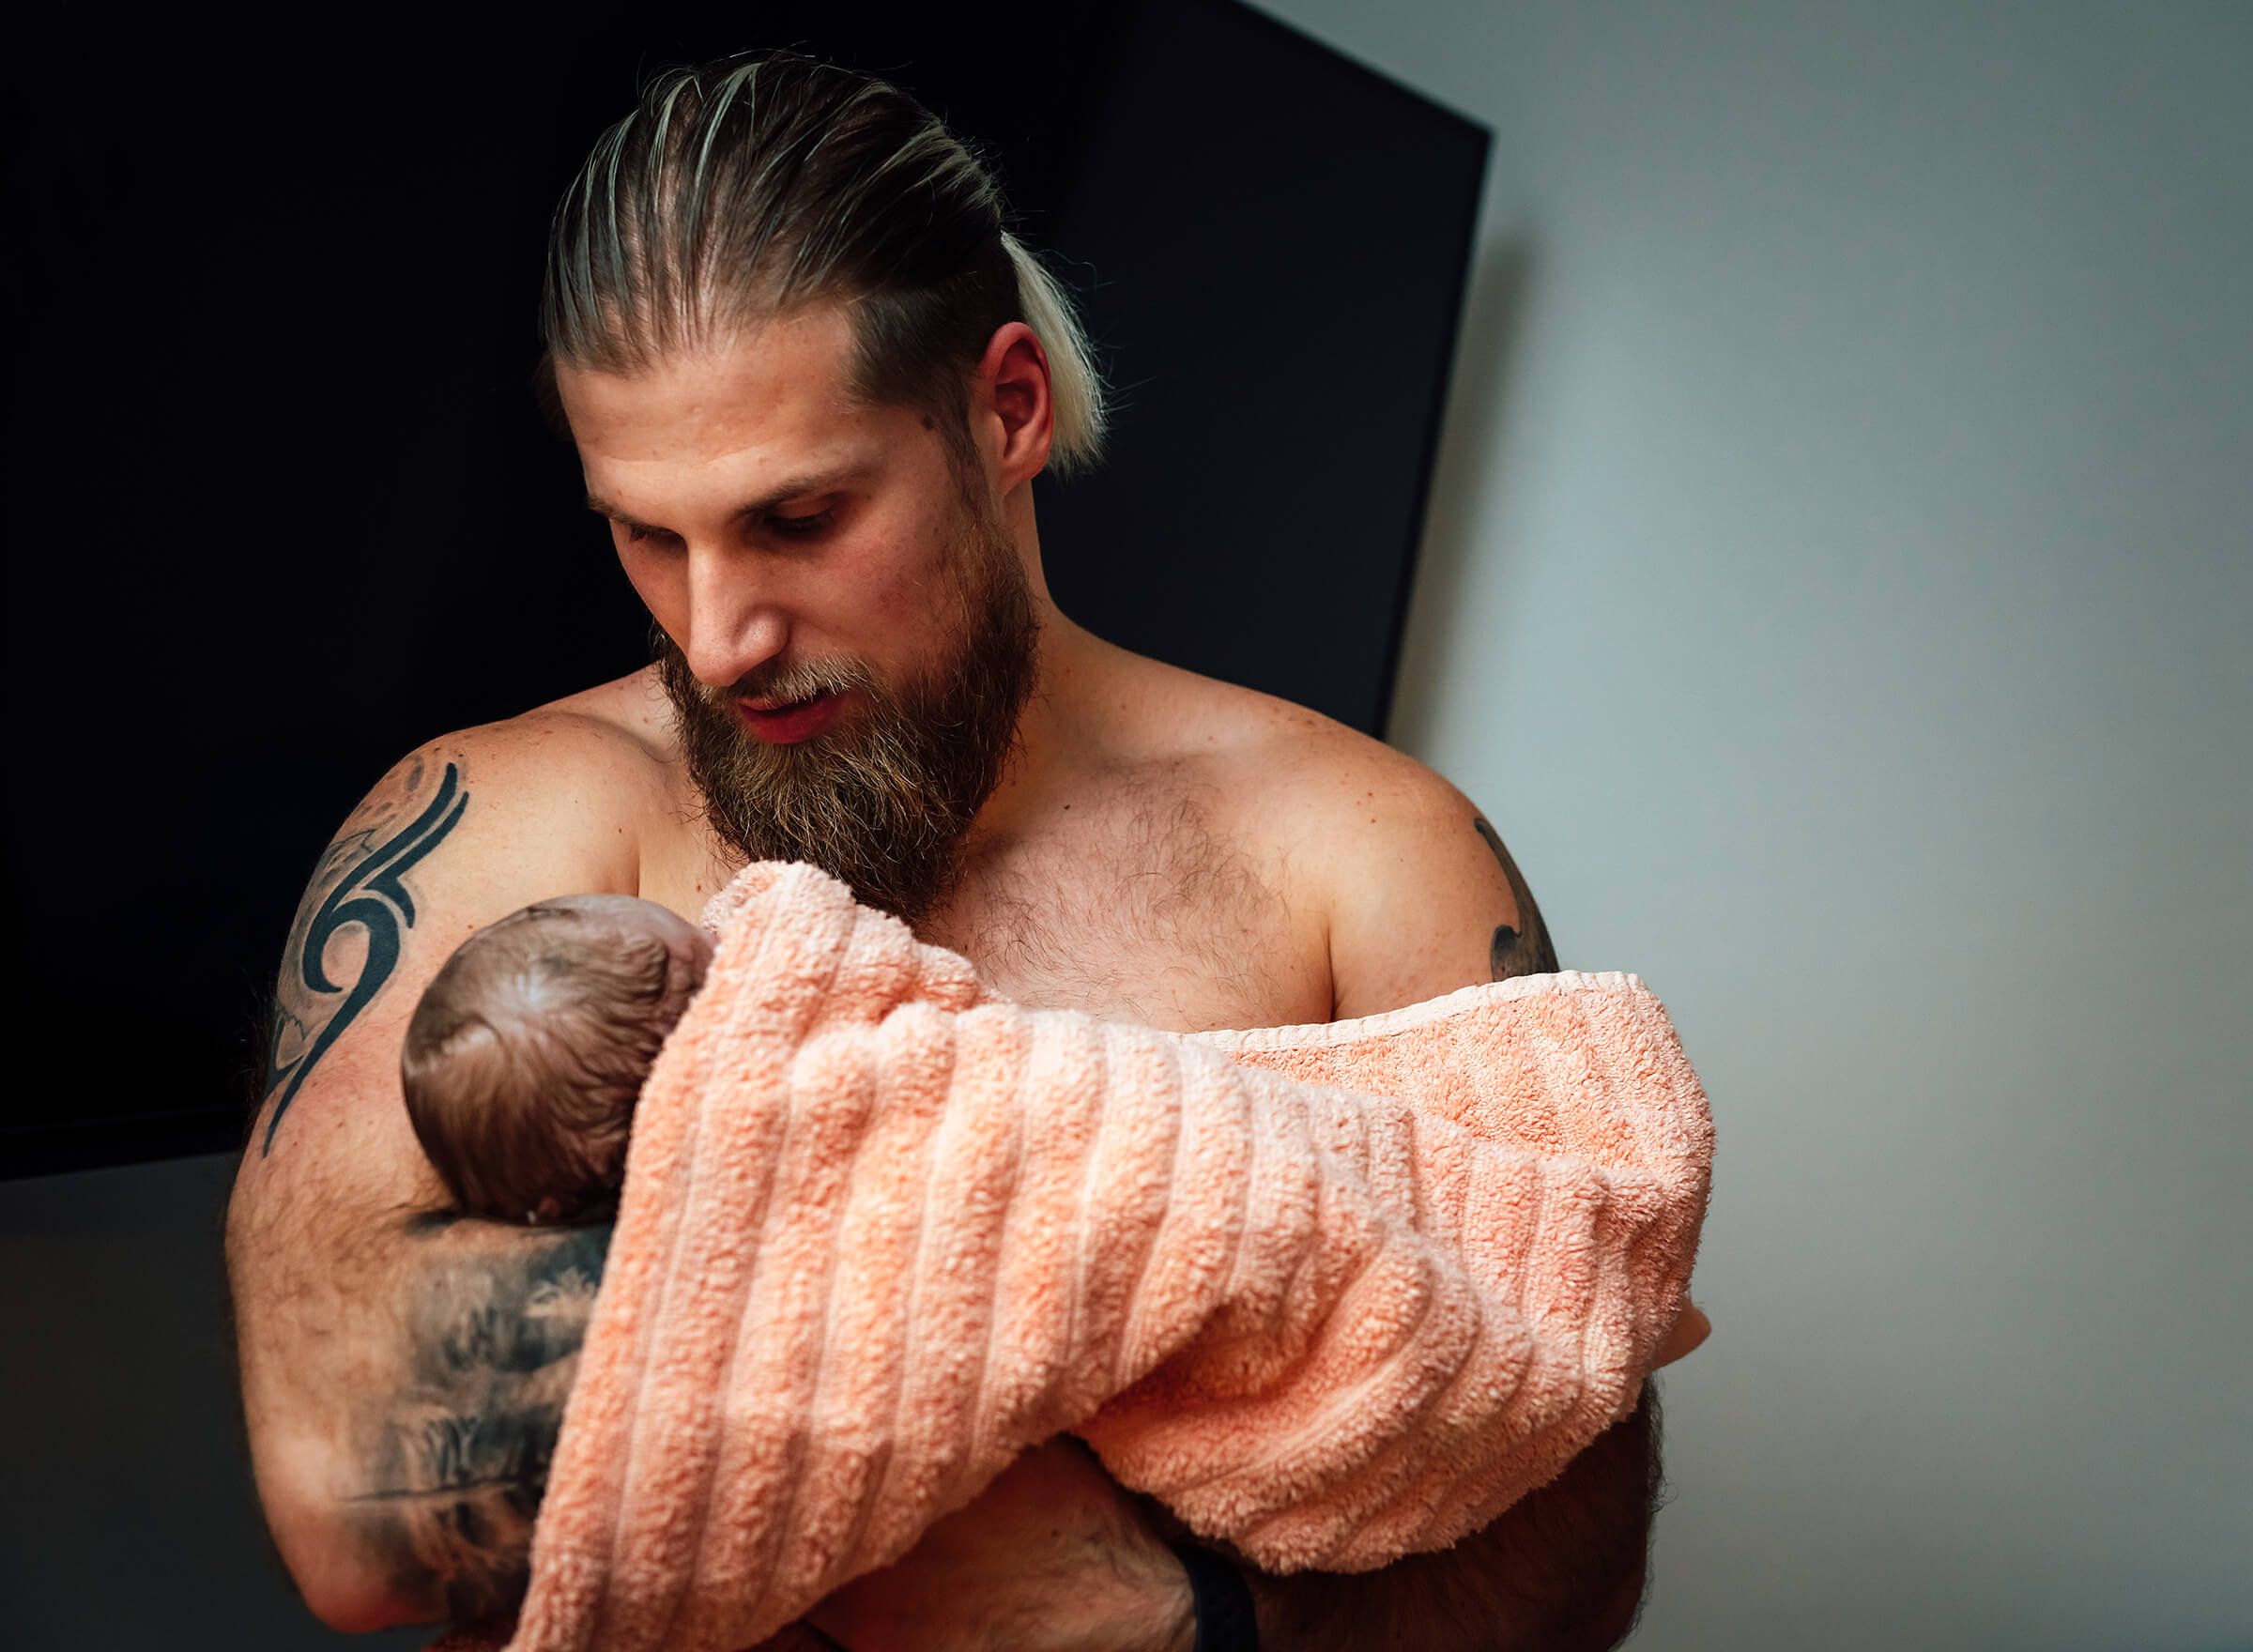 Anthony Prince holding his daughter after their birth at home